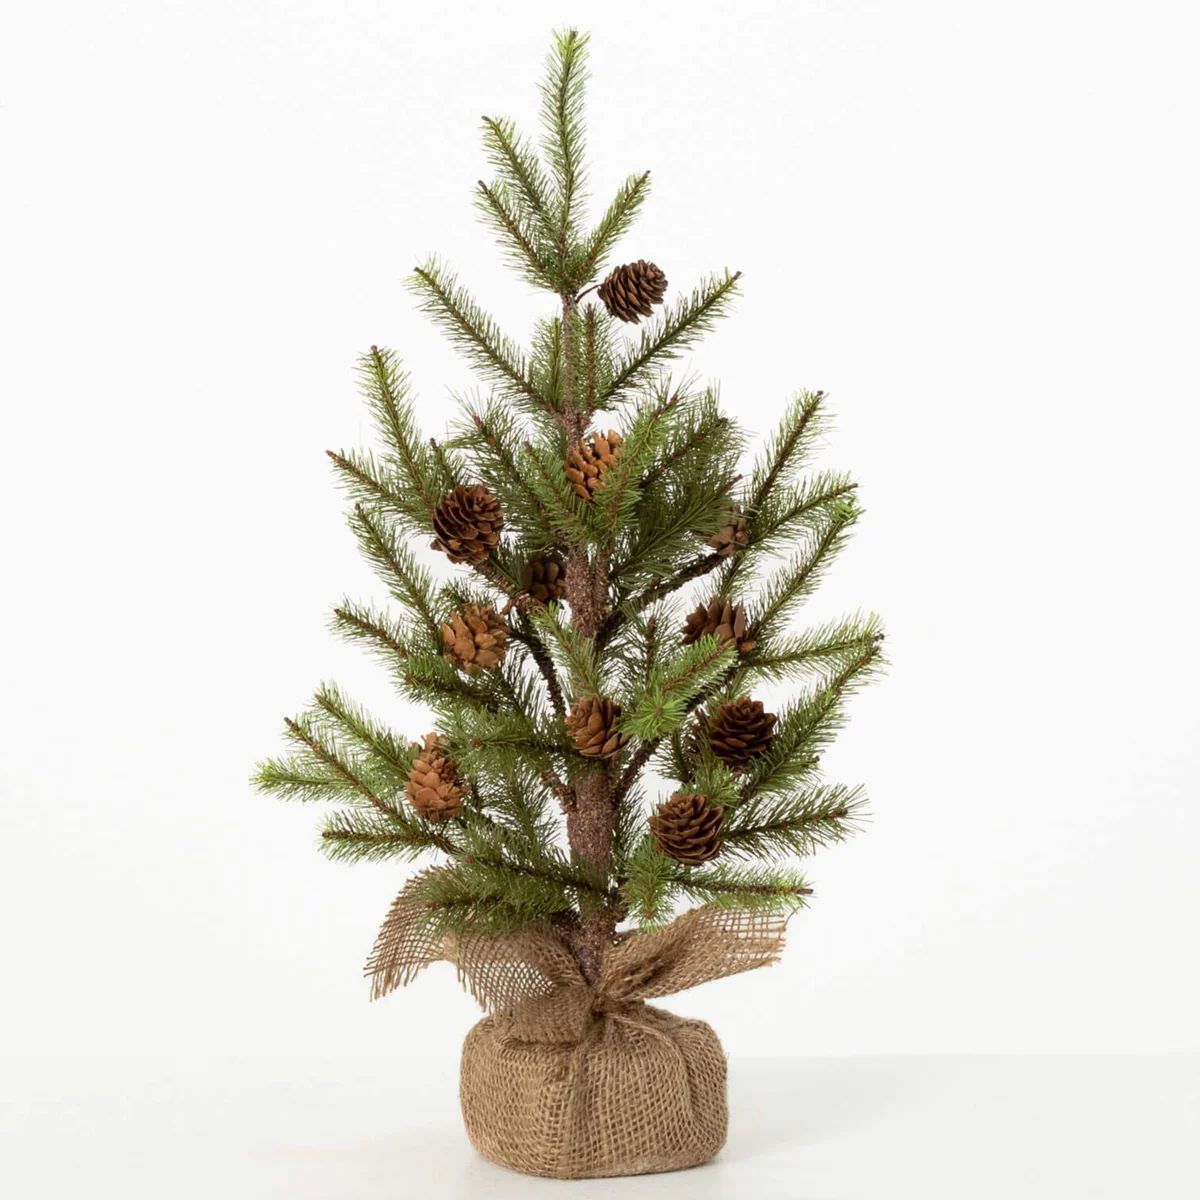 Small Winter Pine Tree with Faux Pinecones In Burlap Base Christmas Tabletop Decor | Darby Creek Trading